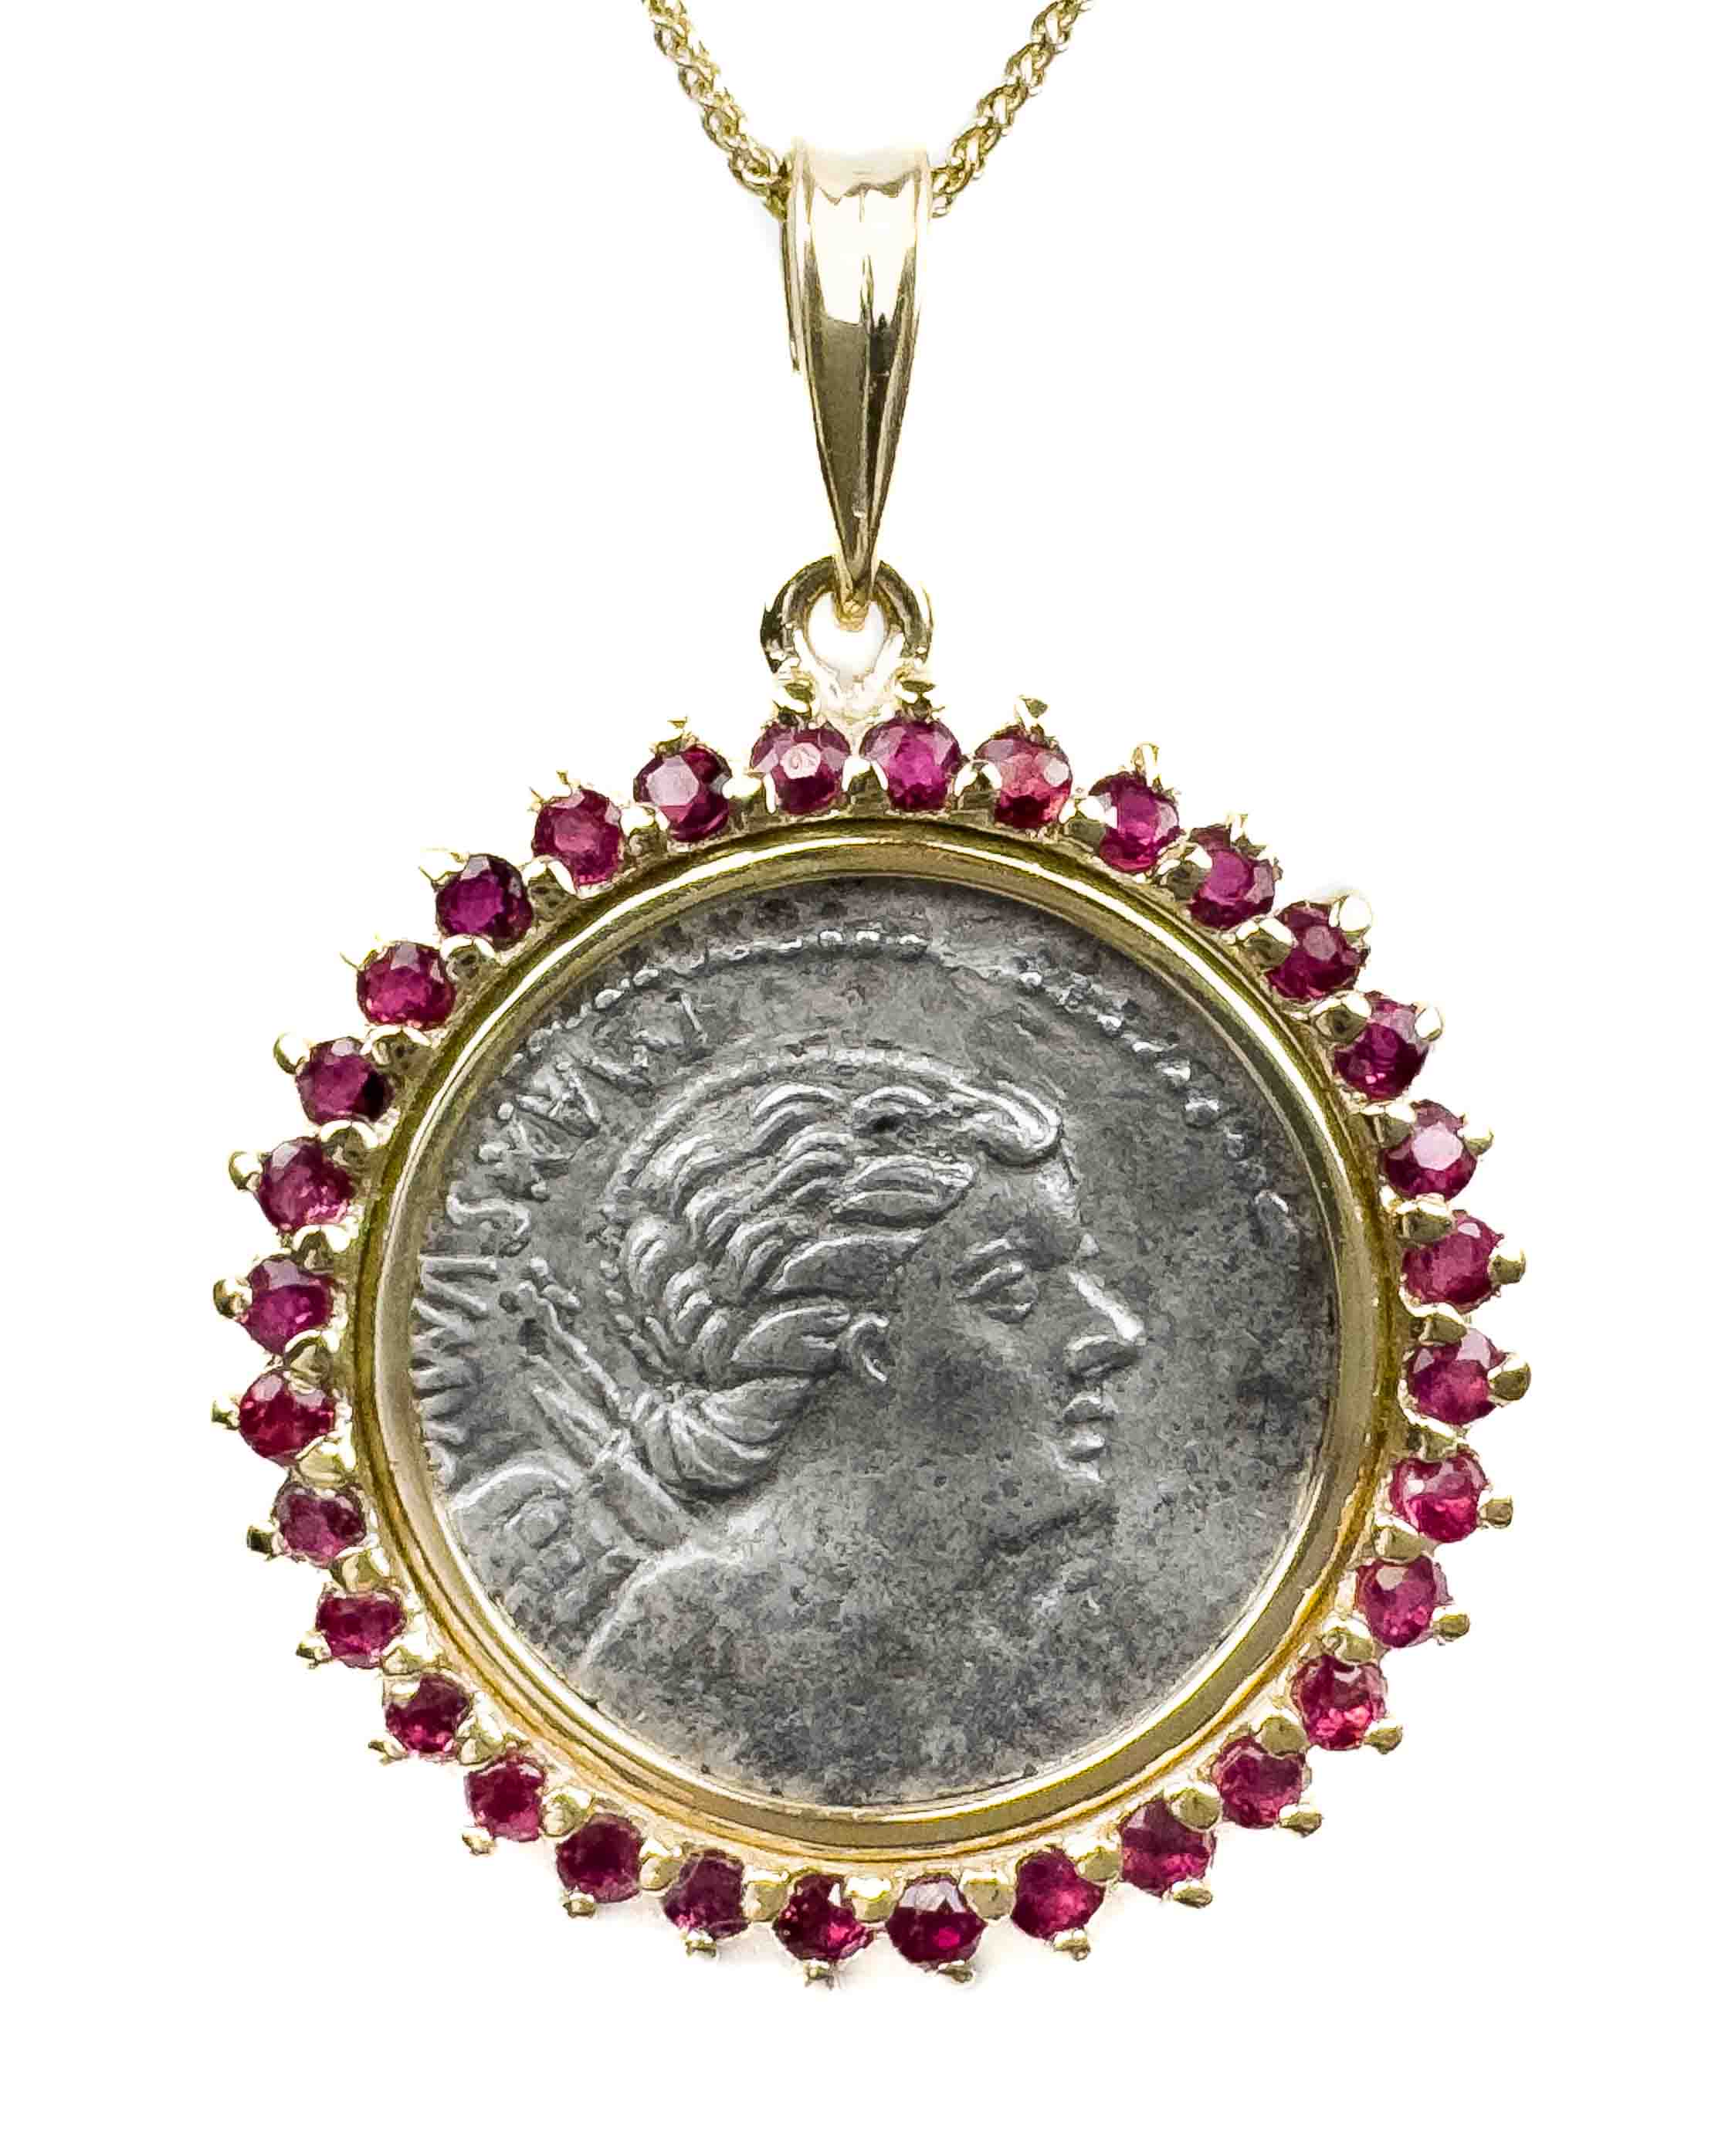 14k Gold & Ruby Genuine Ancient Roman Coin Necklace (Cupid; 75 B.C.)